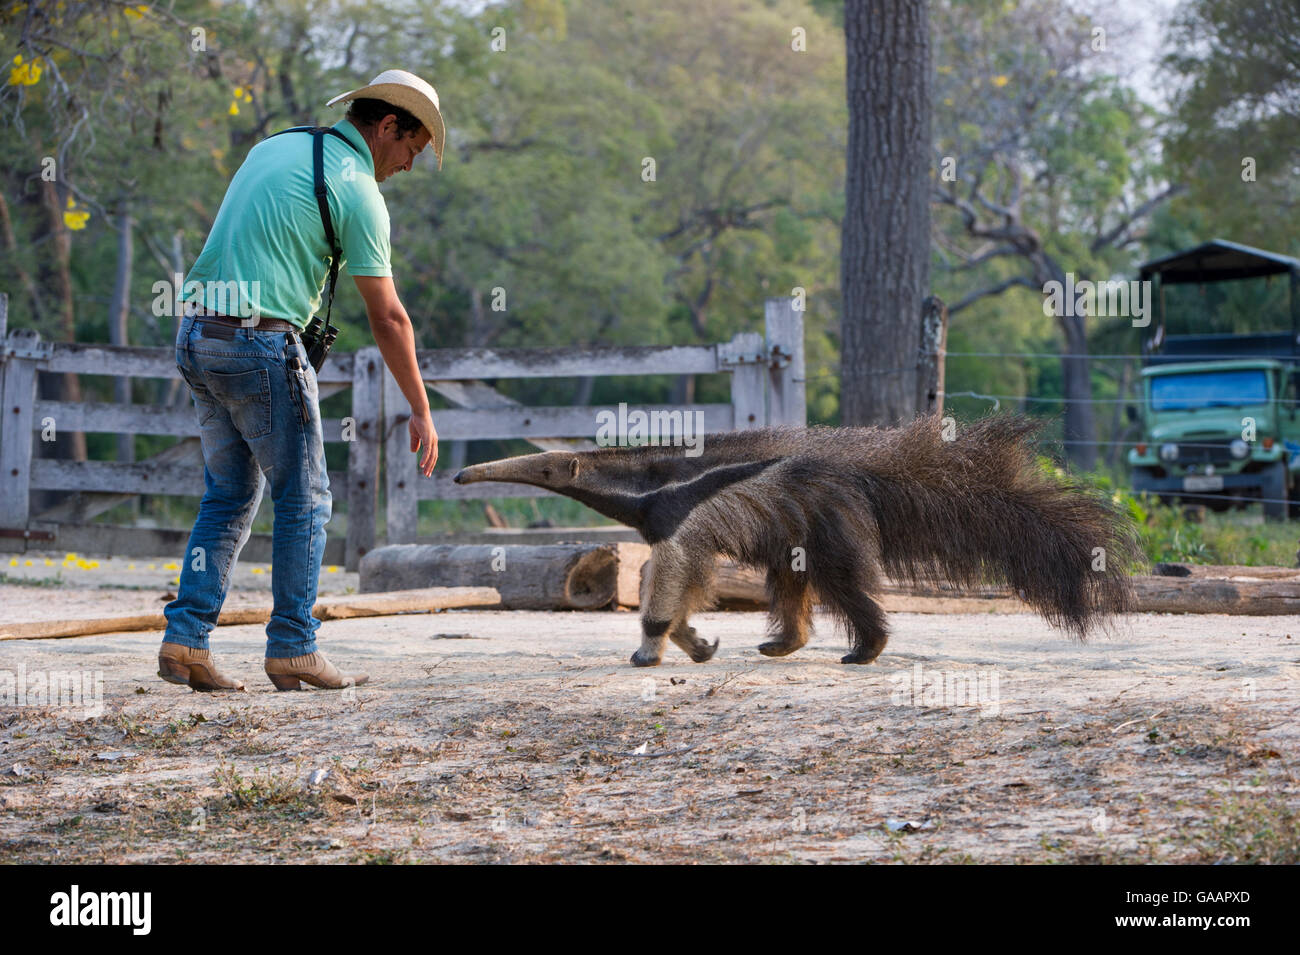 Adult Giant Anteater (Myrmecophaga tridactyla) with Pantaneiro Cowboy, Northern Pantanal, Moto Grosso State, Brazil, South America. Stock Photo